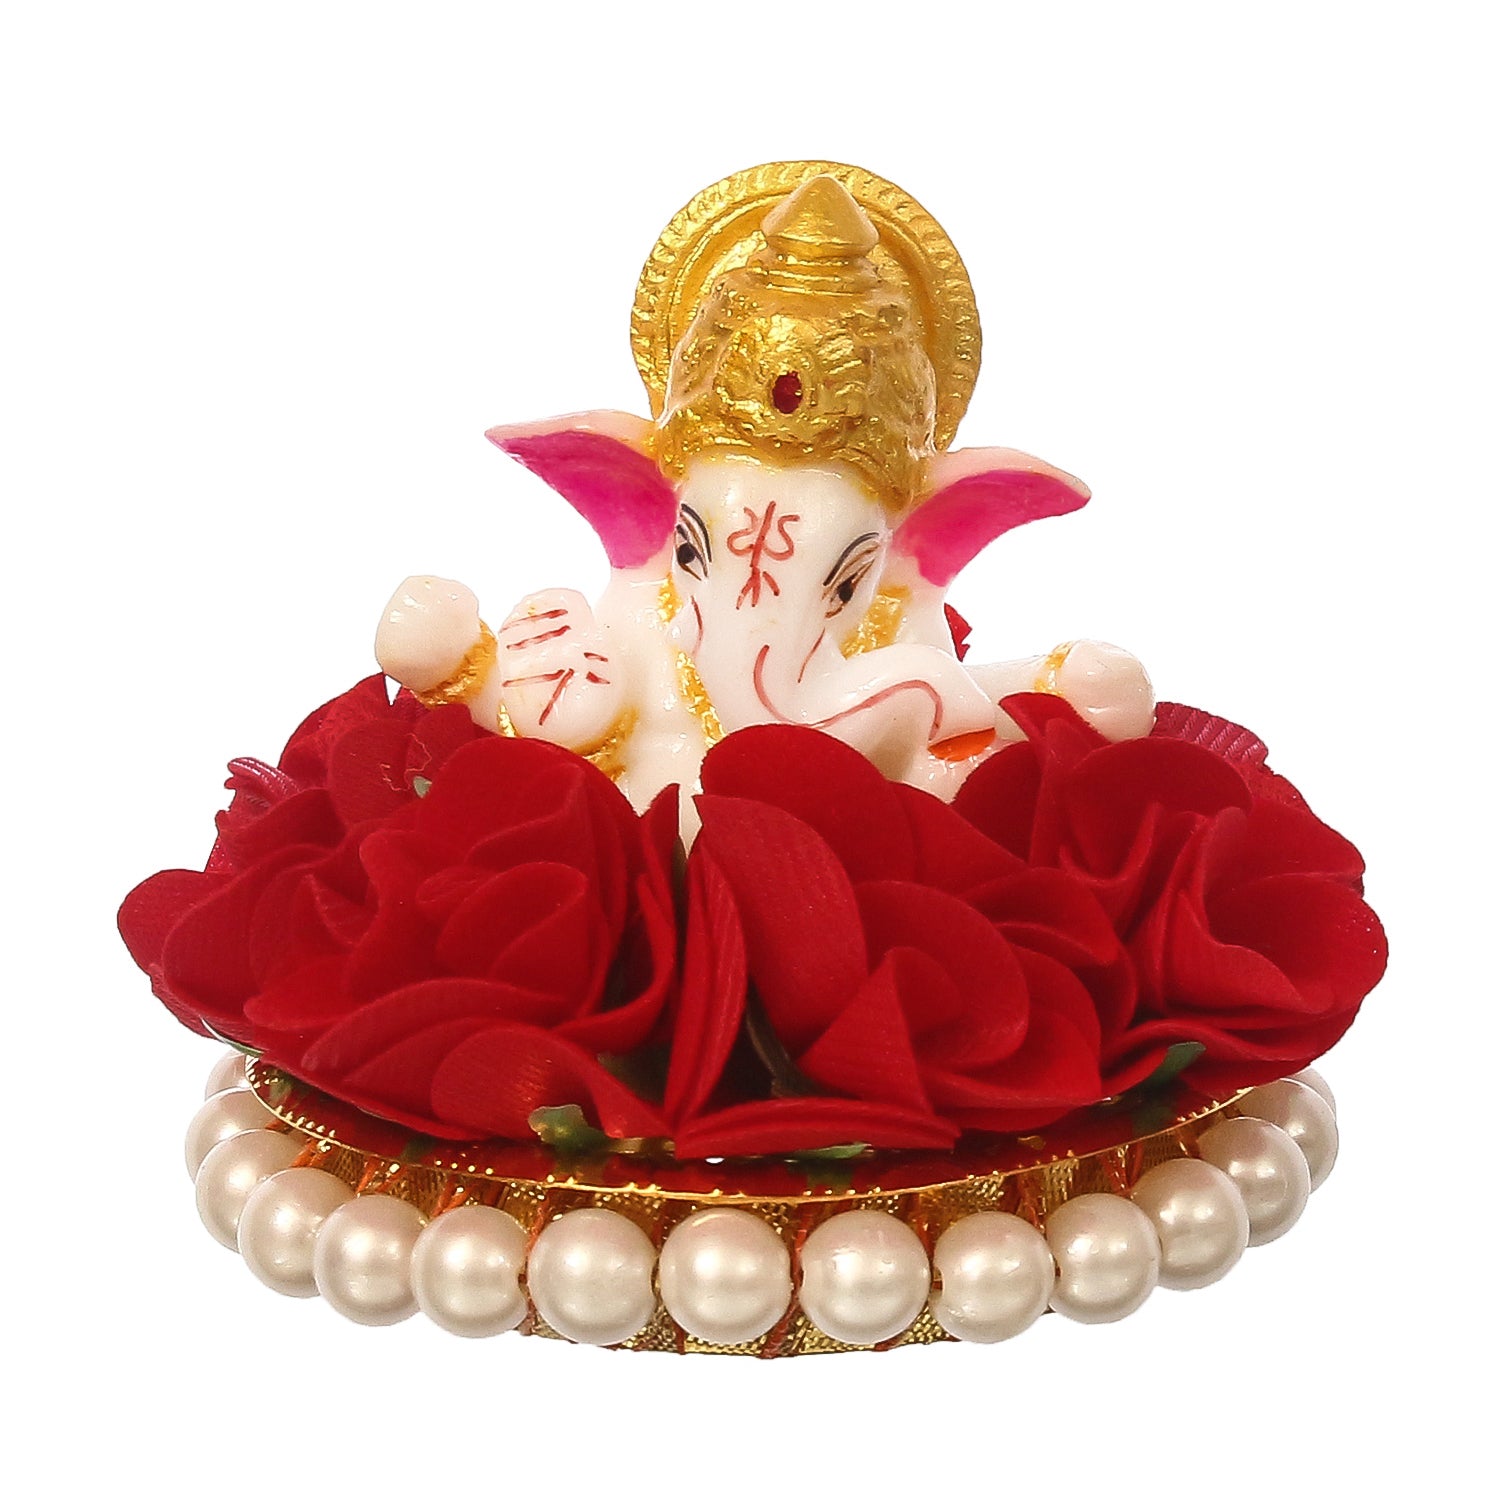 Lord Ganesha Idol on Decorative Handcrafted Plate with Red Flowers 2